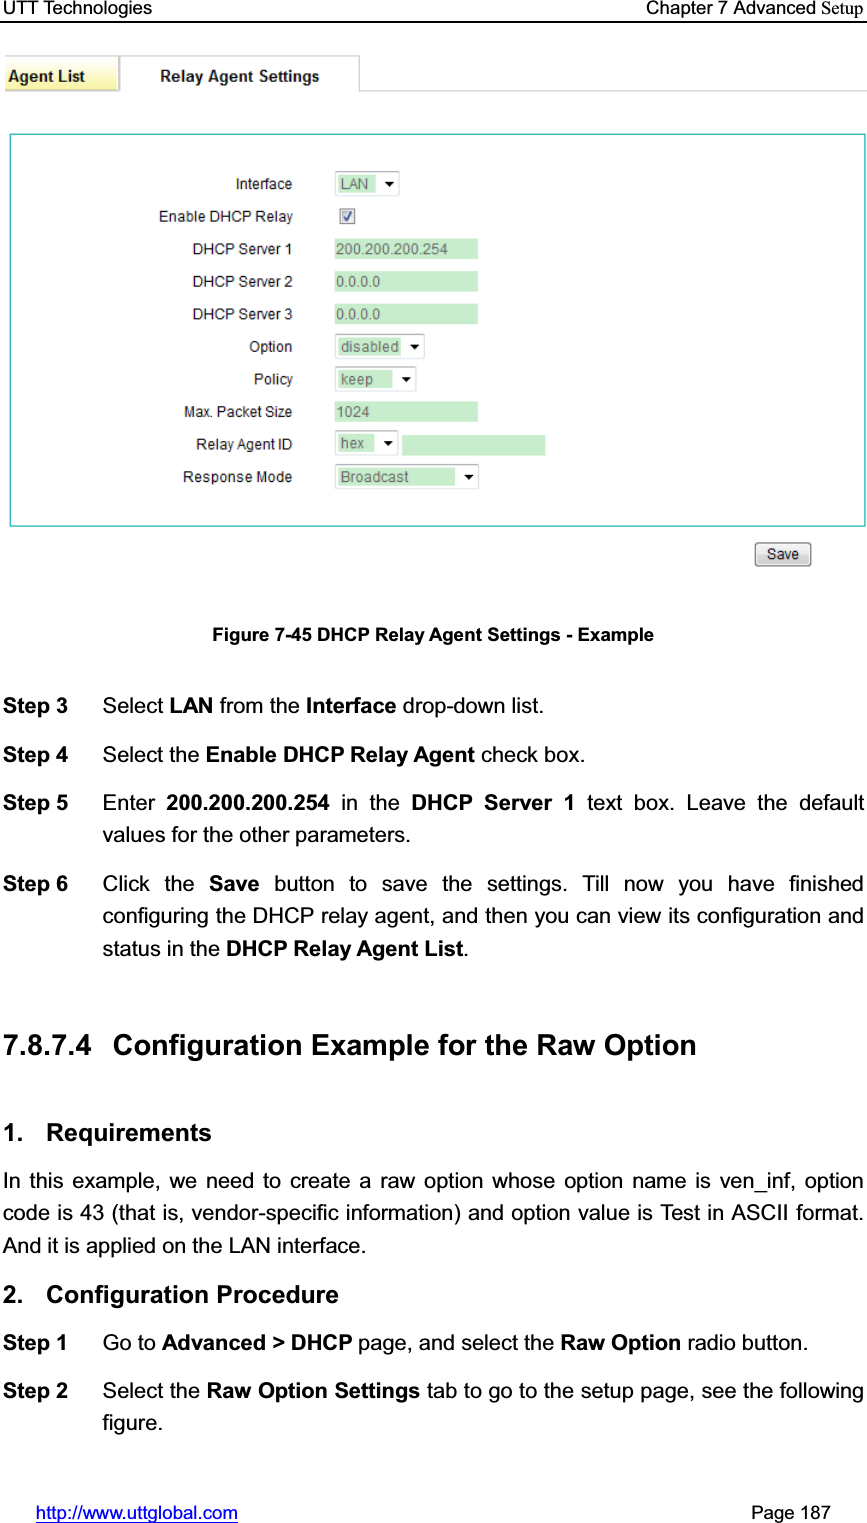 UTT Technologies    Chapter 7 Advanced Setuphttp://www.uttglobal.com                                                       Page 187 Figure 7-45 DHCP Relay Agent Settings - Example Step 3  Select LAN from the Interface drop-down list. Step 4  Select the Enable DHCP Relay Agent check box. Step 5  Enter 200.200.200.254 in the DHCP Server 1 text box. Leave the default values for the other parameters. Step 6  Click the Save button to save the settings. Till now you have finished configuring the DHCP relay agent, and then you can view its configuration andstatus in the DHCP Relay Agent List.7.8.7.4  Configuration Example for the Raw Option 1. Requirements In this example, we need to create a raw option whose option name is ven_inf, option code is 43 (that is, vendor-specific information) and option value is Test in ASCII format. And it is applied on the LAN interface. 2. Configuration Procedure Step 1  Go to Advanced &gt; DHCP page, and select the Raw Option radio button. Step 2  Select the Raw Option Settings tab to go to the setup page, see the following figure. 